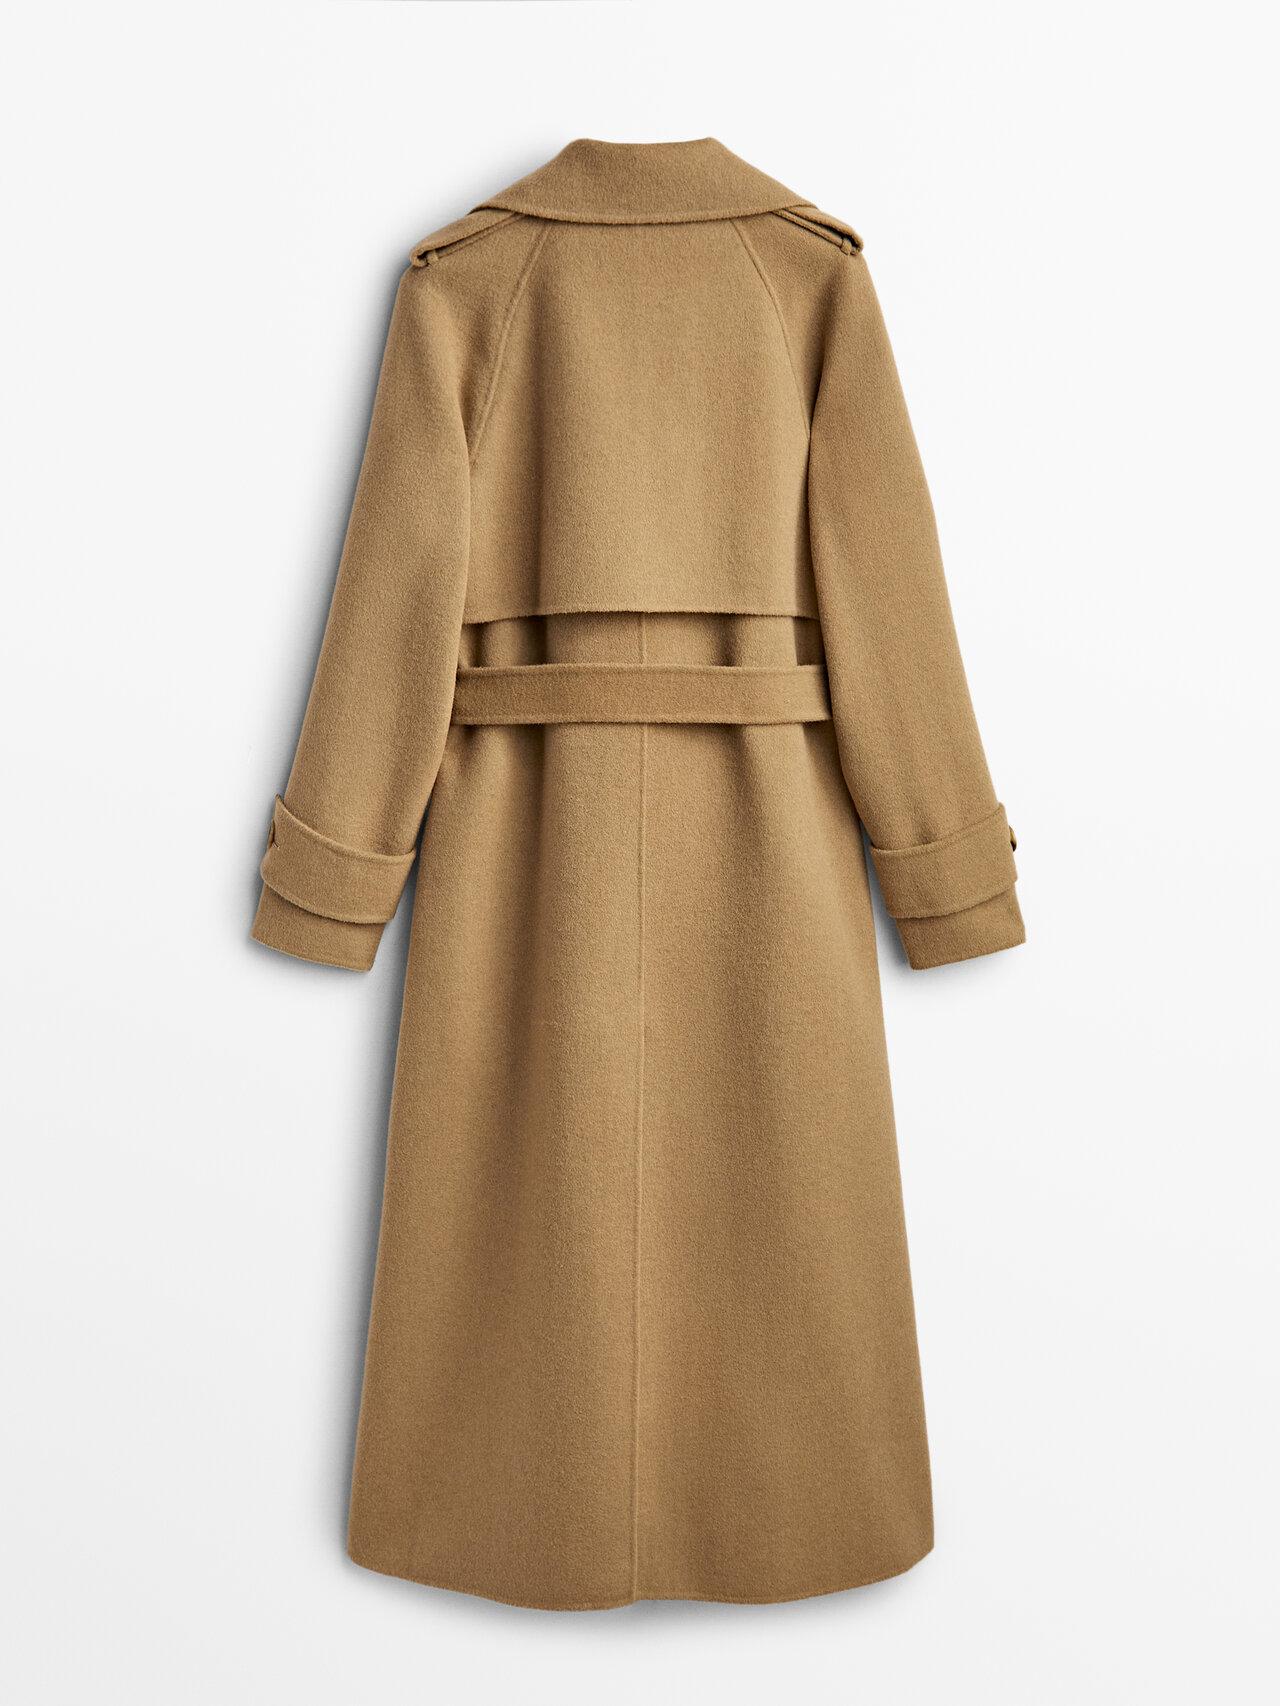 MASSIMO DUTTI Wool Trench Coat With Belt in Natural | Lyst